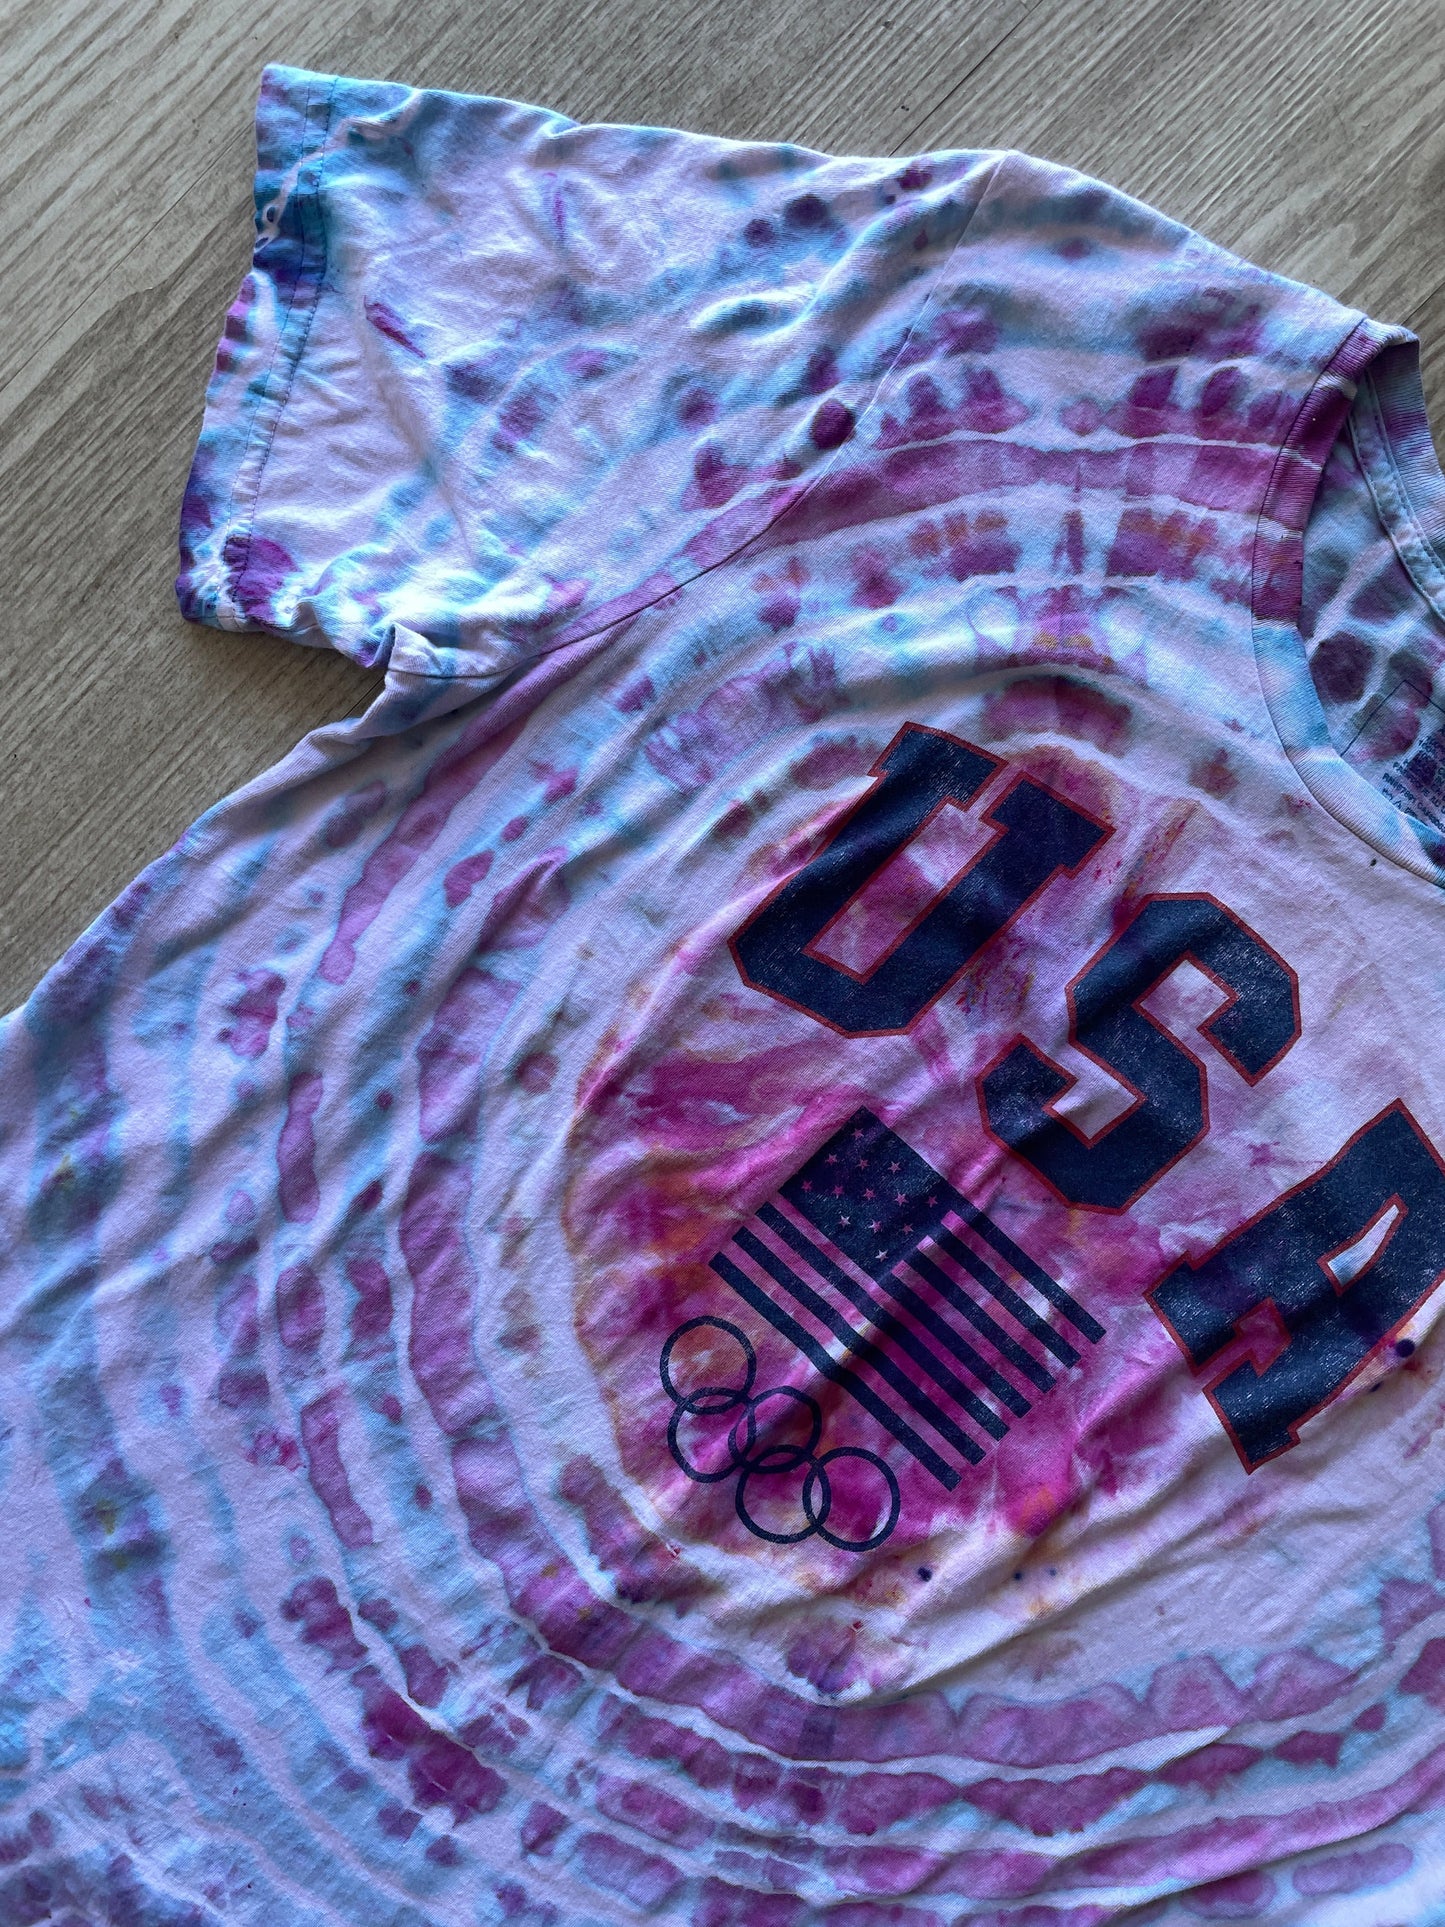 XL Men’s Team USA Handmade Tie Dye Short Sleeve T-Shirt | One-Of-a-Kind Upcycled Pink and Purple Galaxy Ice Dye Geode Top